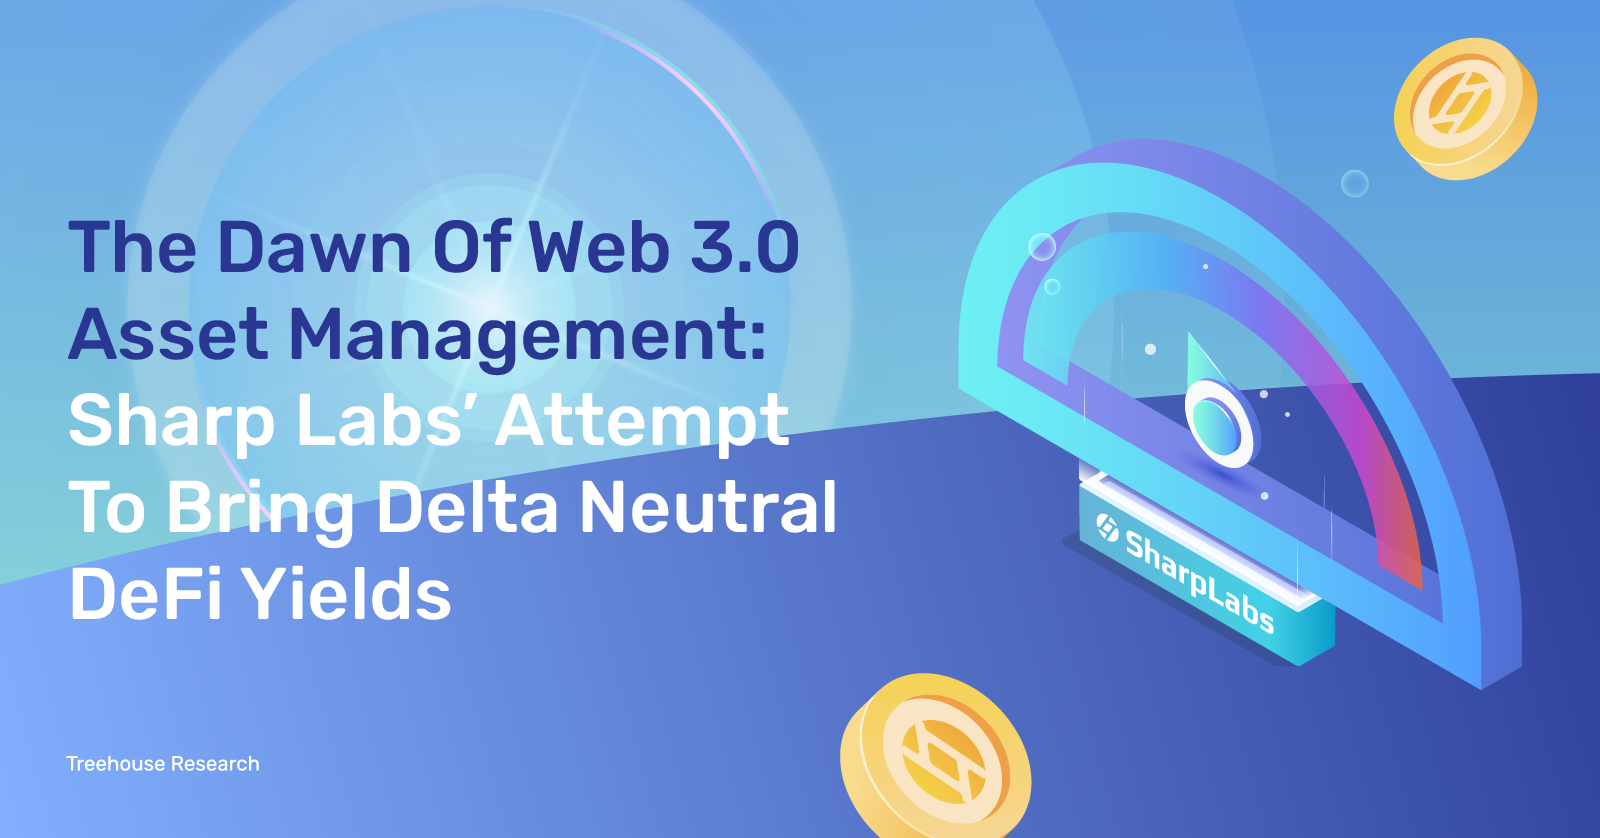 The Dawn of Web3 Asset Management: Sharp Labs Attempt to Bring Delta Neutral DeFi Yields